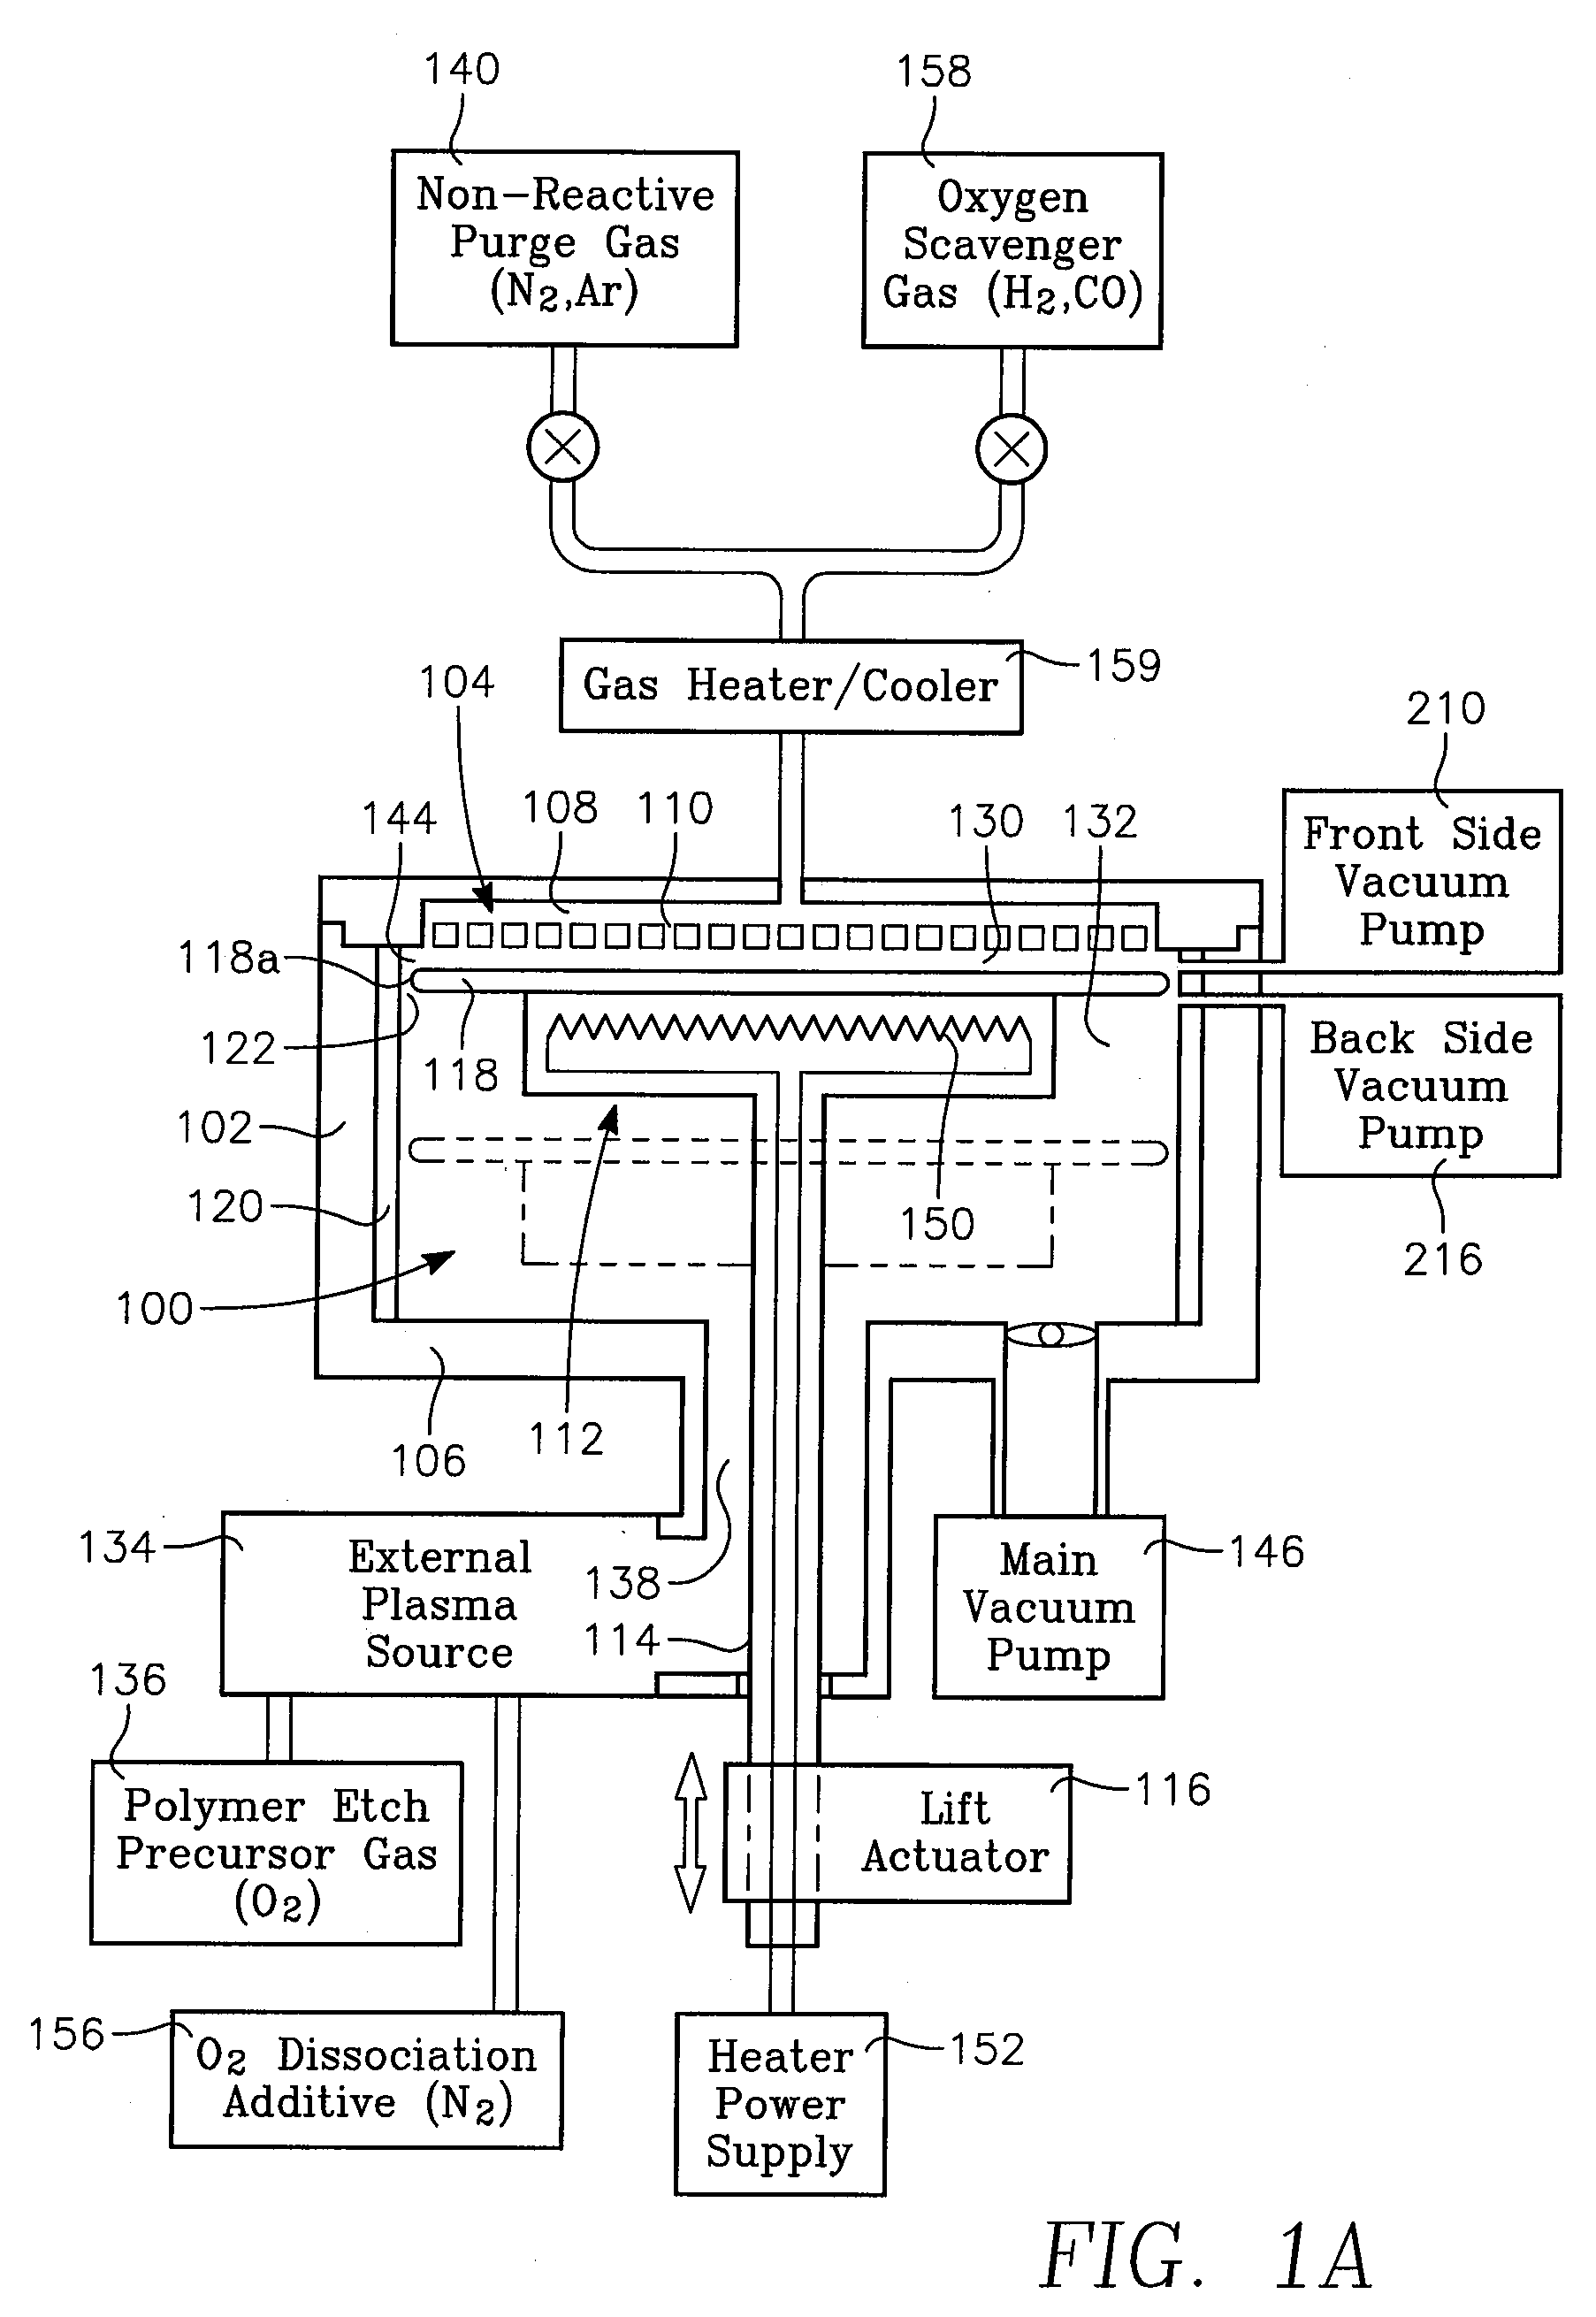 Reactor for wafer backside polymer removal using plasma products in a lower process zone and purge gases in an upper process zone